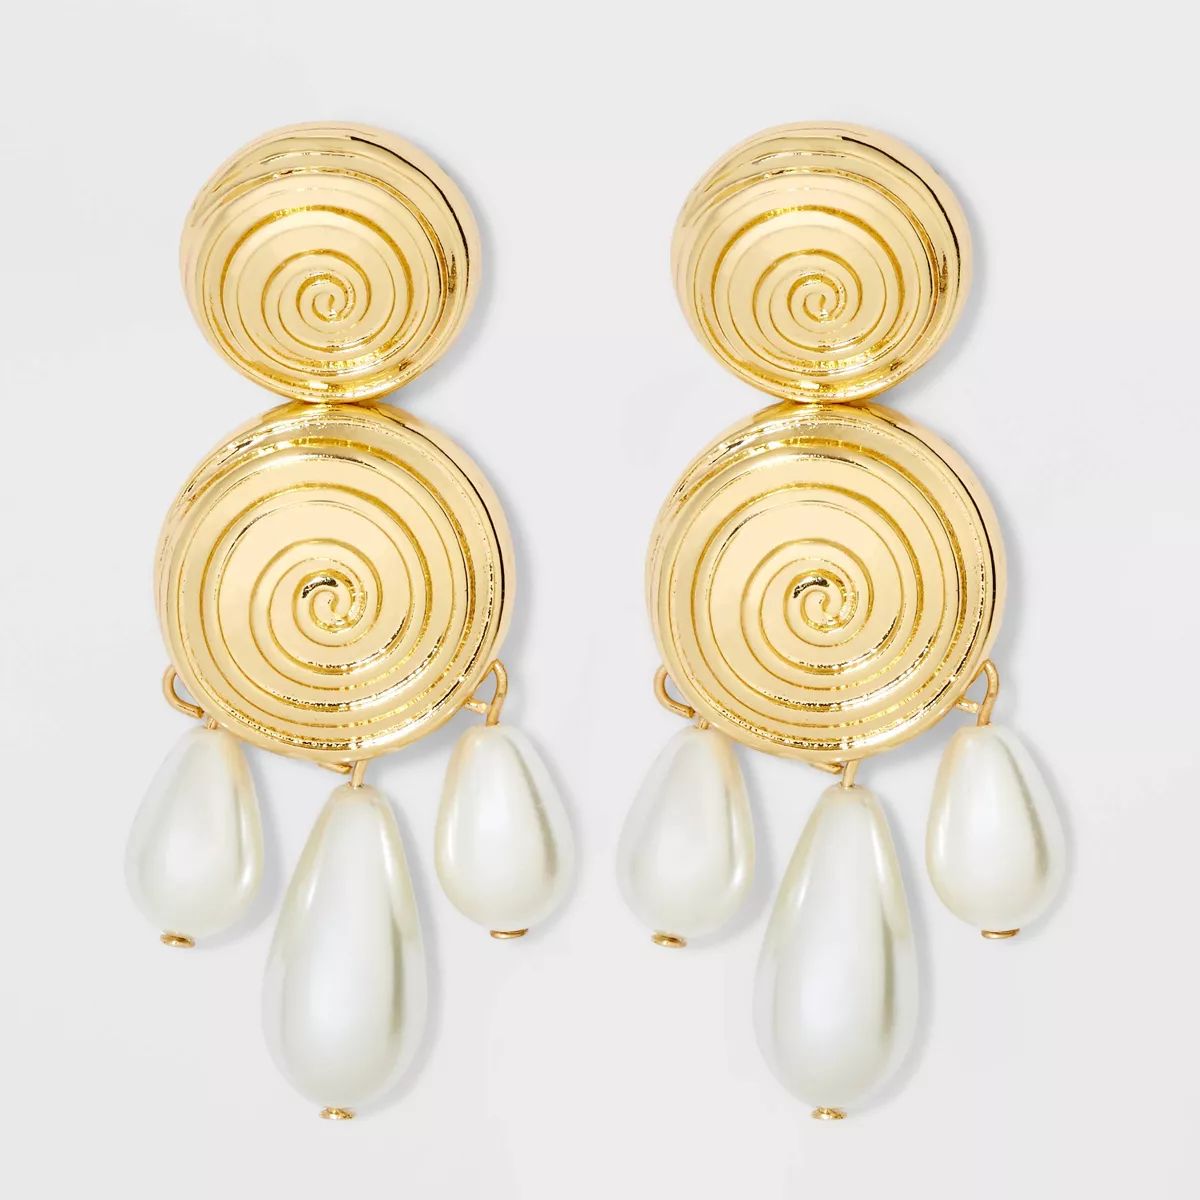 SUGARFIX by BaubleBar Swirled Gold and Pearl Statement Earrings | Target